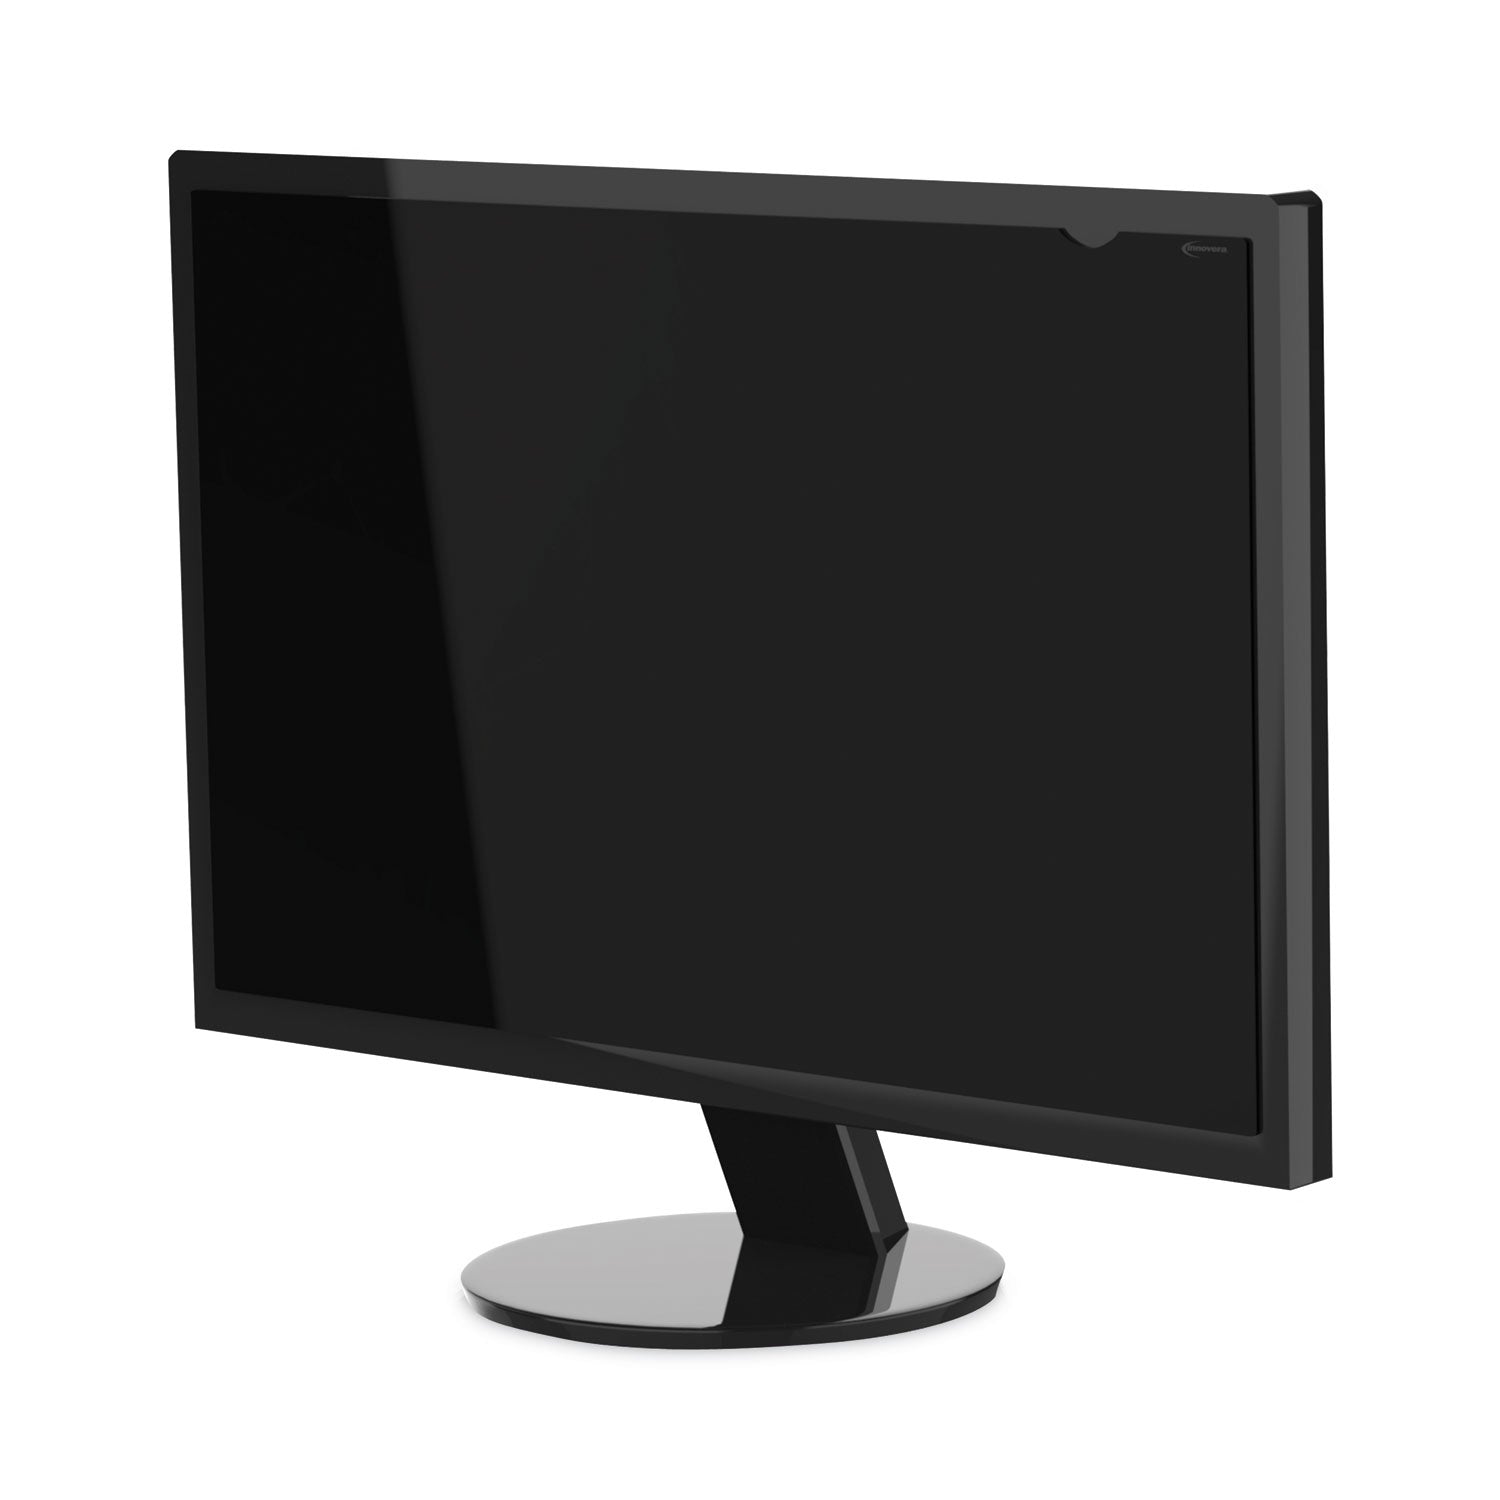 blackout-privacy-filter-for-27-widescreen-flat-panel-monitor-169-aspect-ratio_ivrblf27w - 5